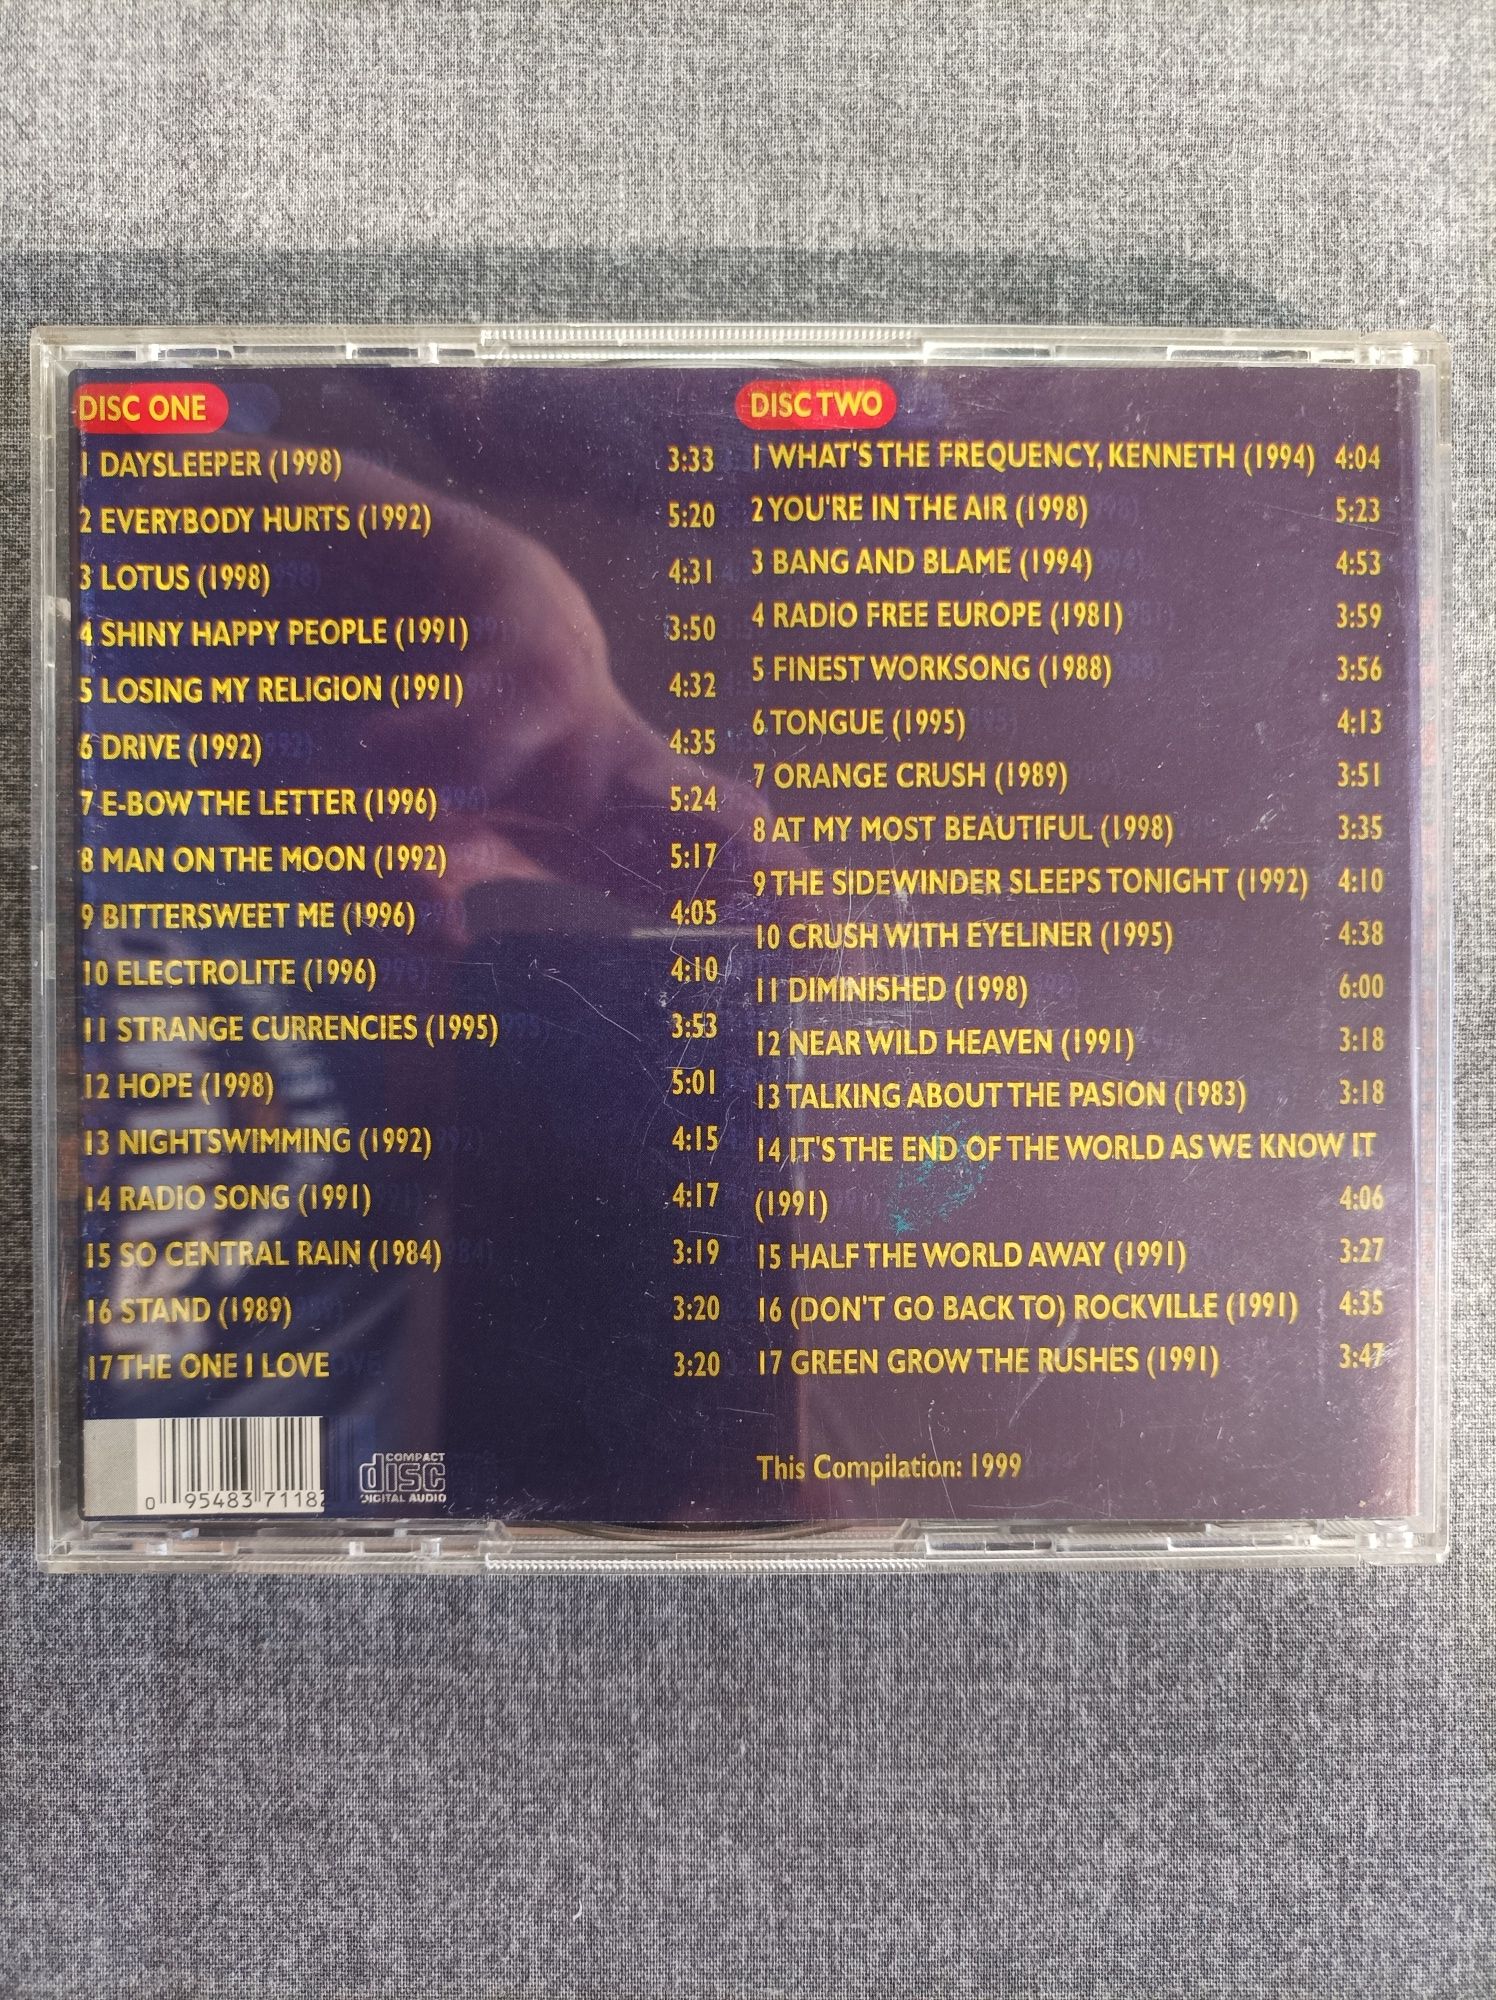 58 - R.E.M. Gold Collection , Vaya con Dios THE BEST OF  - 4 x CD